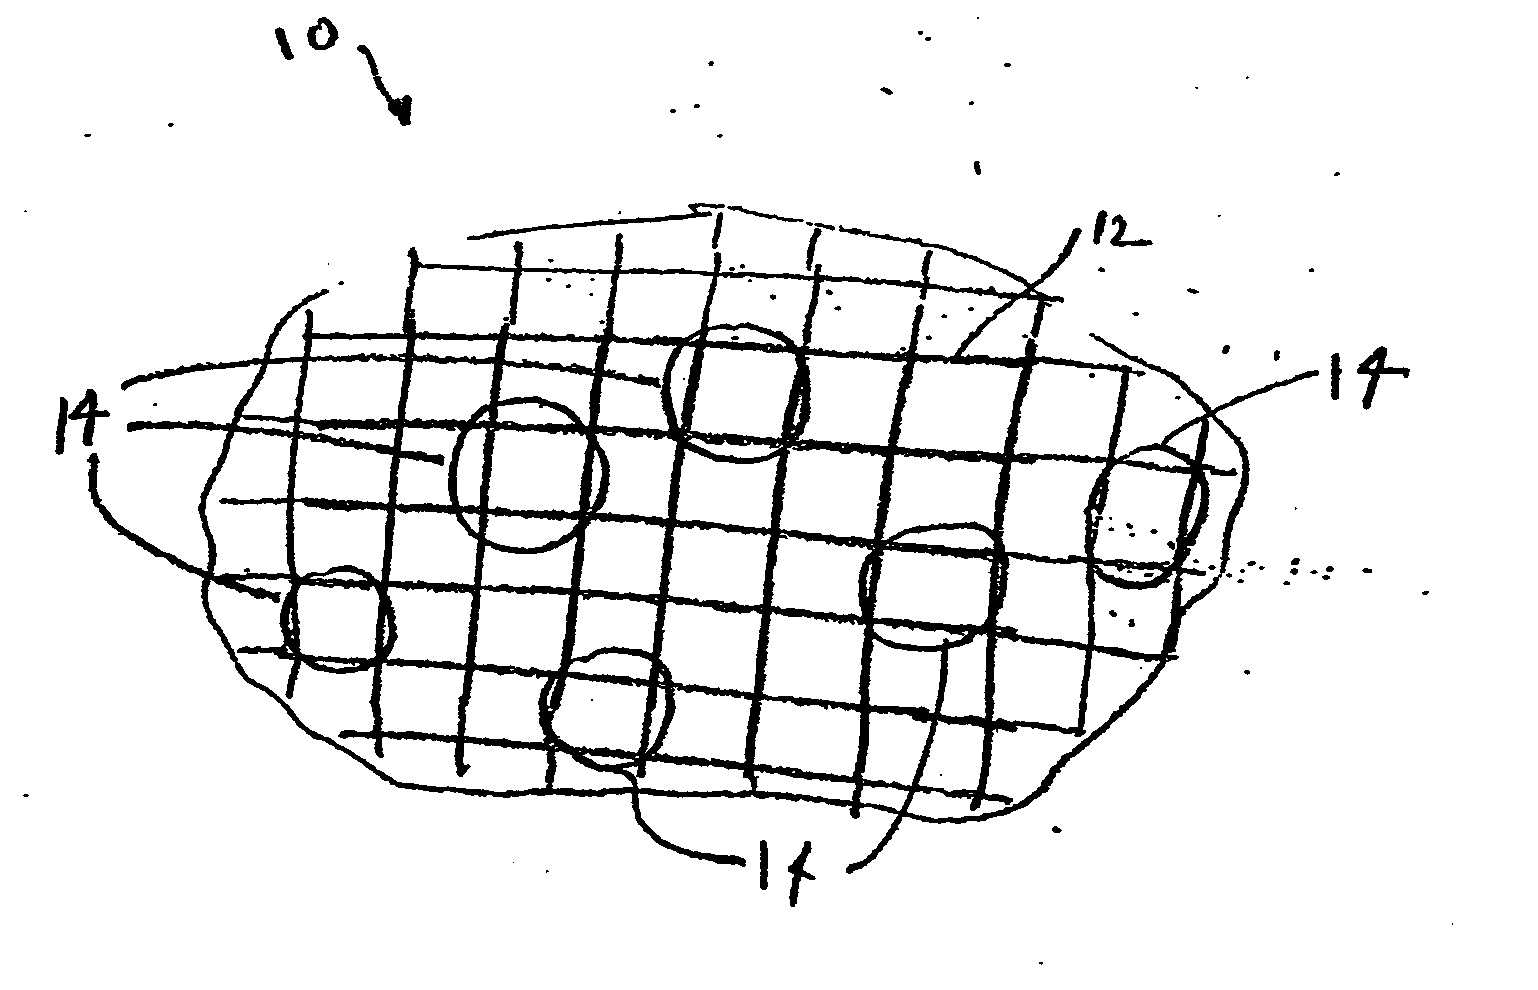 Devices and methods for the delivery of blood clotting materials to bleeding wounds